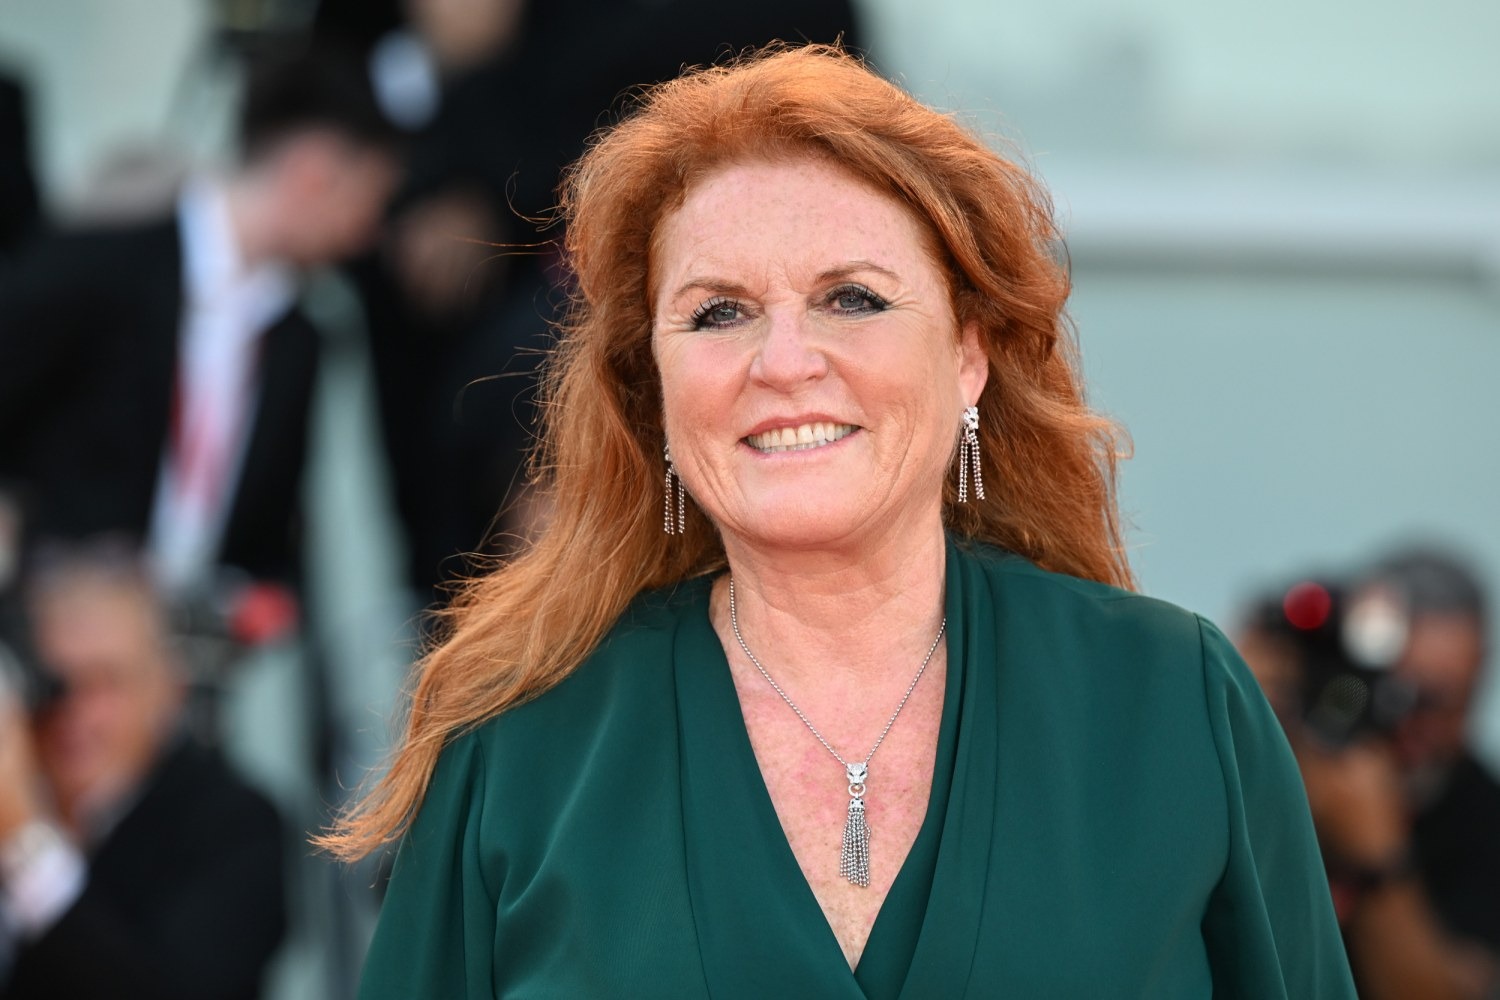 Sarah Ferguson was shocked to receive a diagnosis of malignant melanoma, but she remains in good spirits